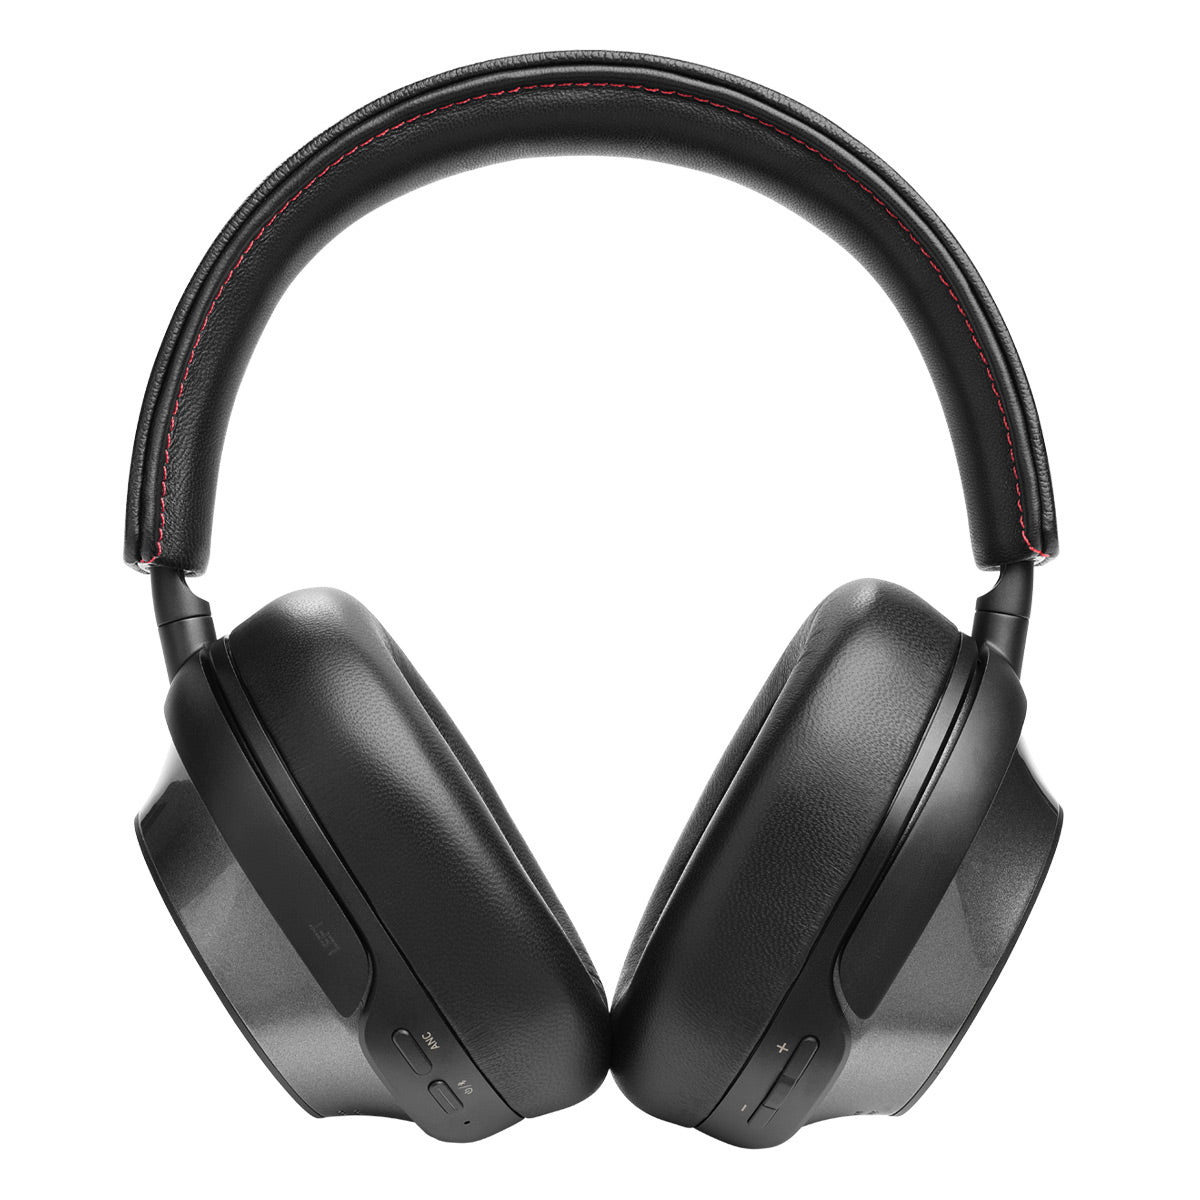 Mark Levinson No. 5909 Premium High-Resolution Wireless Adaptive ANC Noise Cancelling Headphone (Ice Pewter)